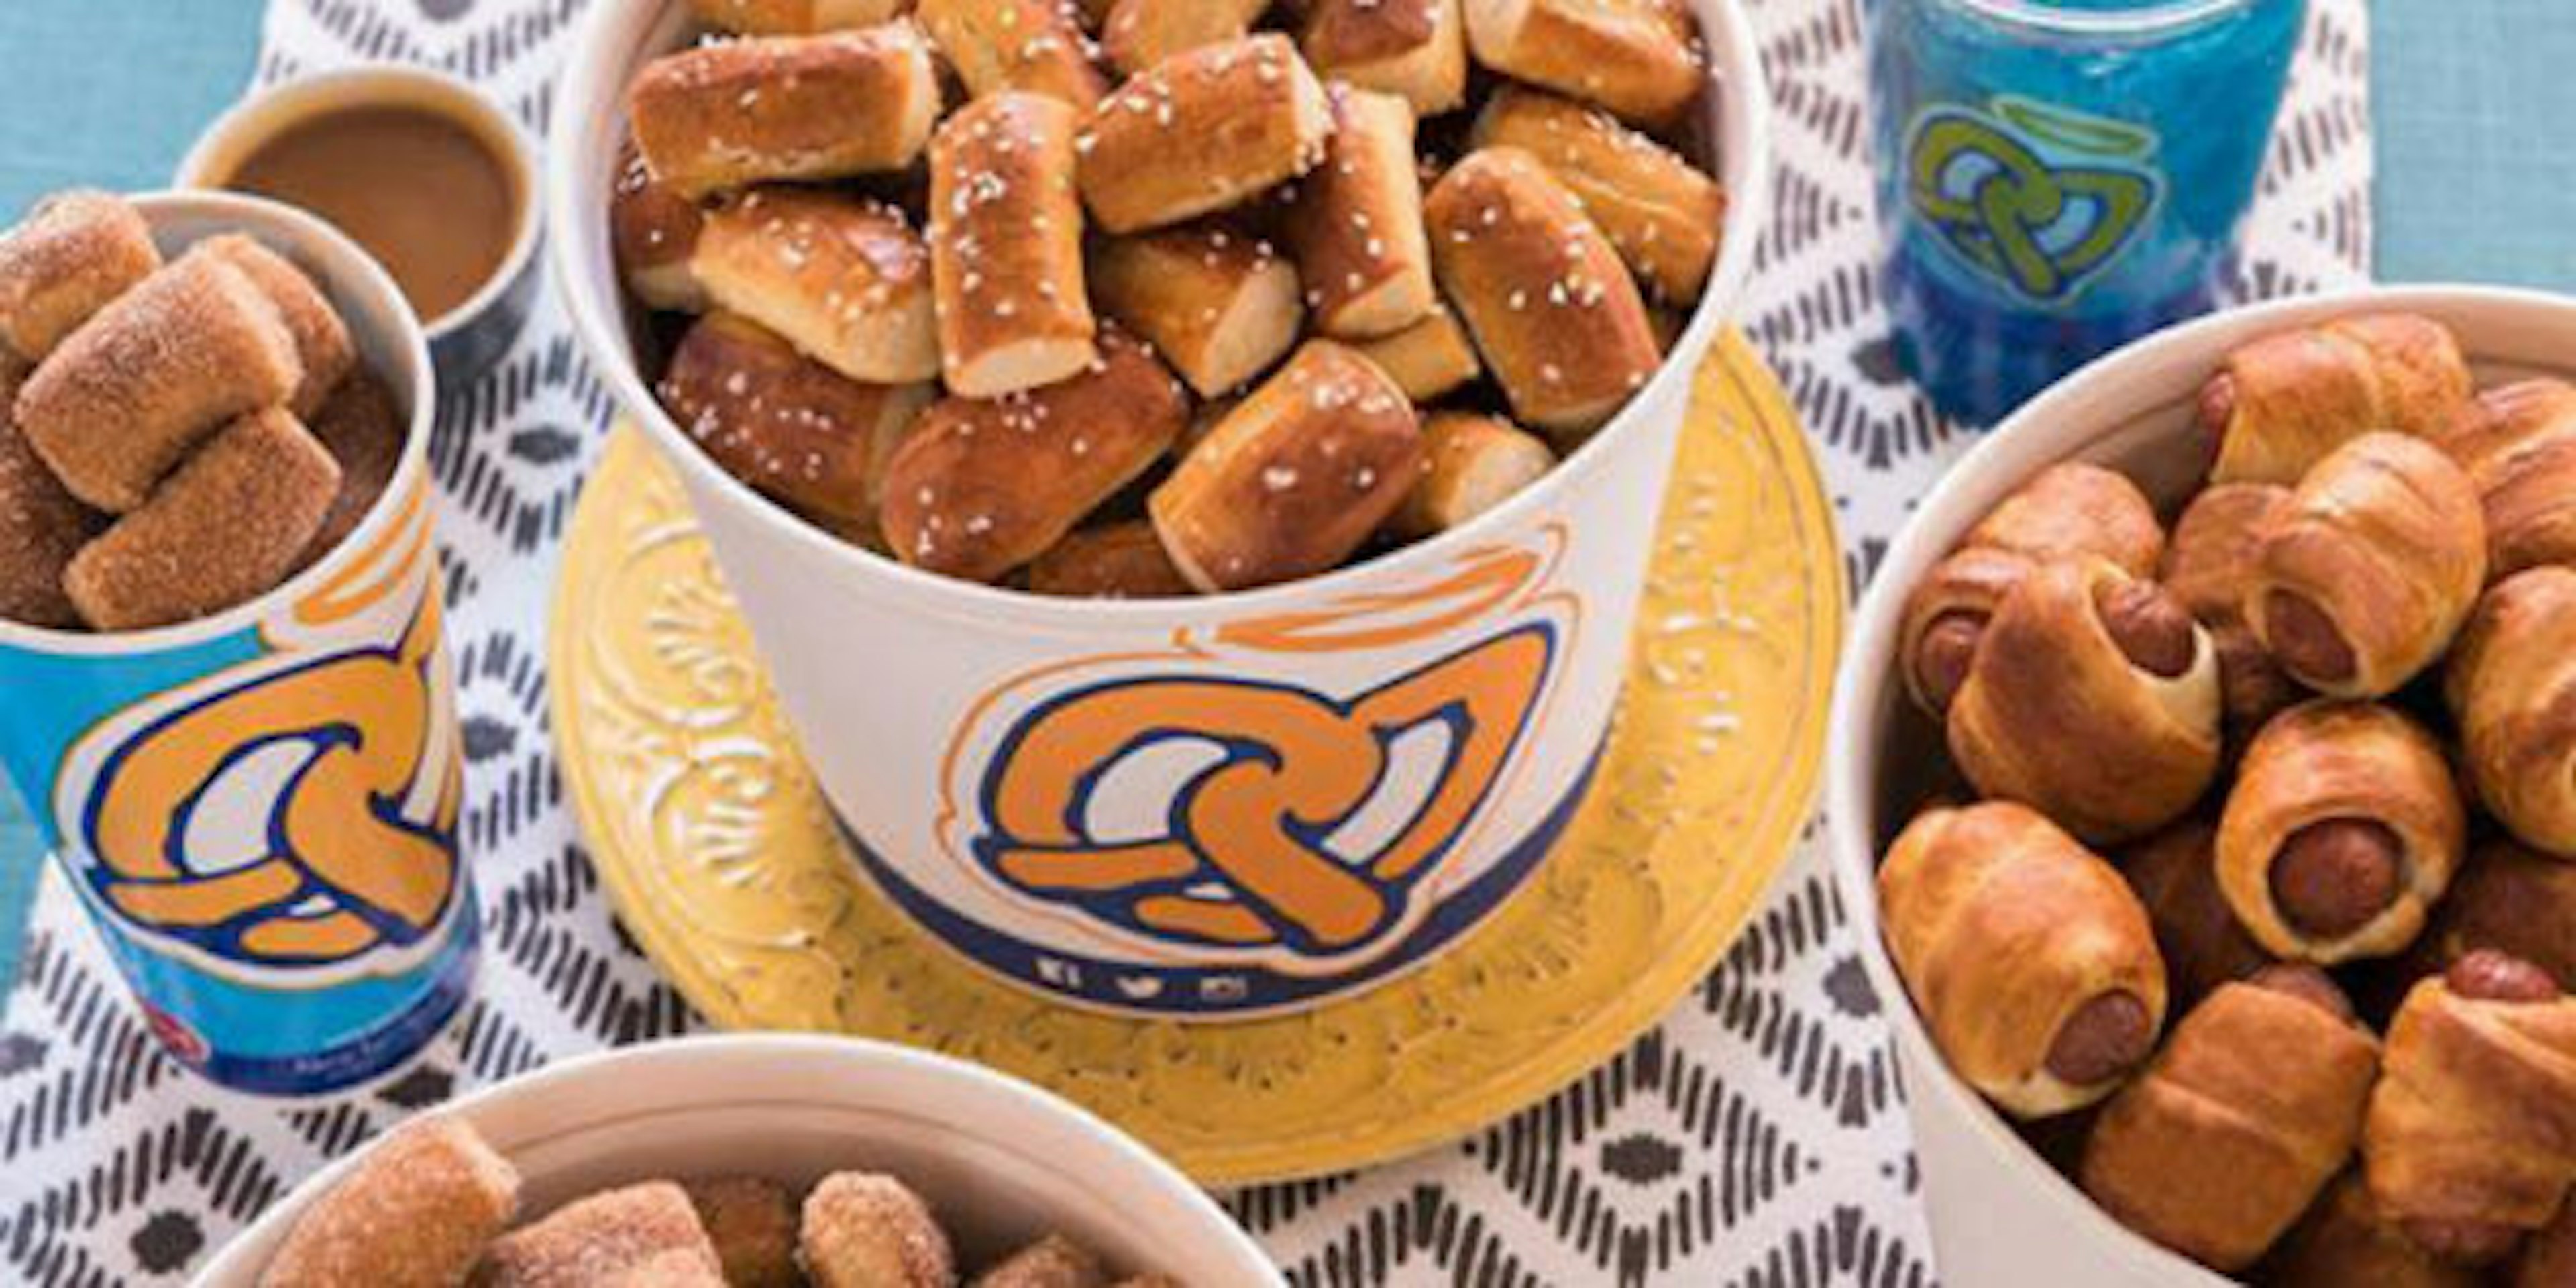 FREE Classic Pretzel With Purchase Of Any Two Pretzel Items